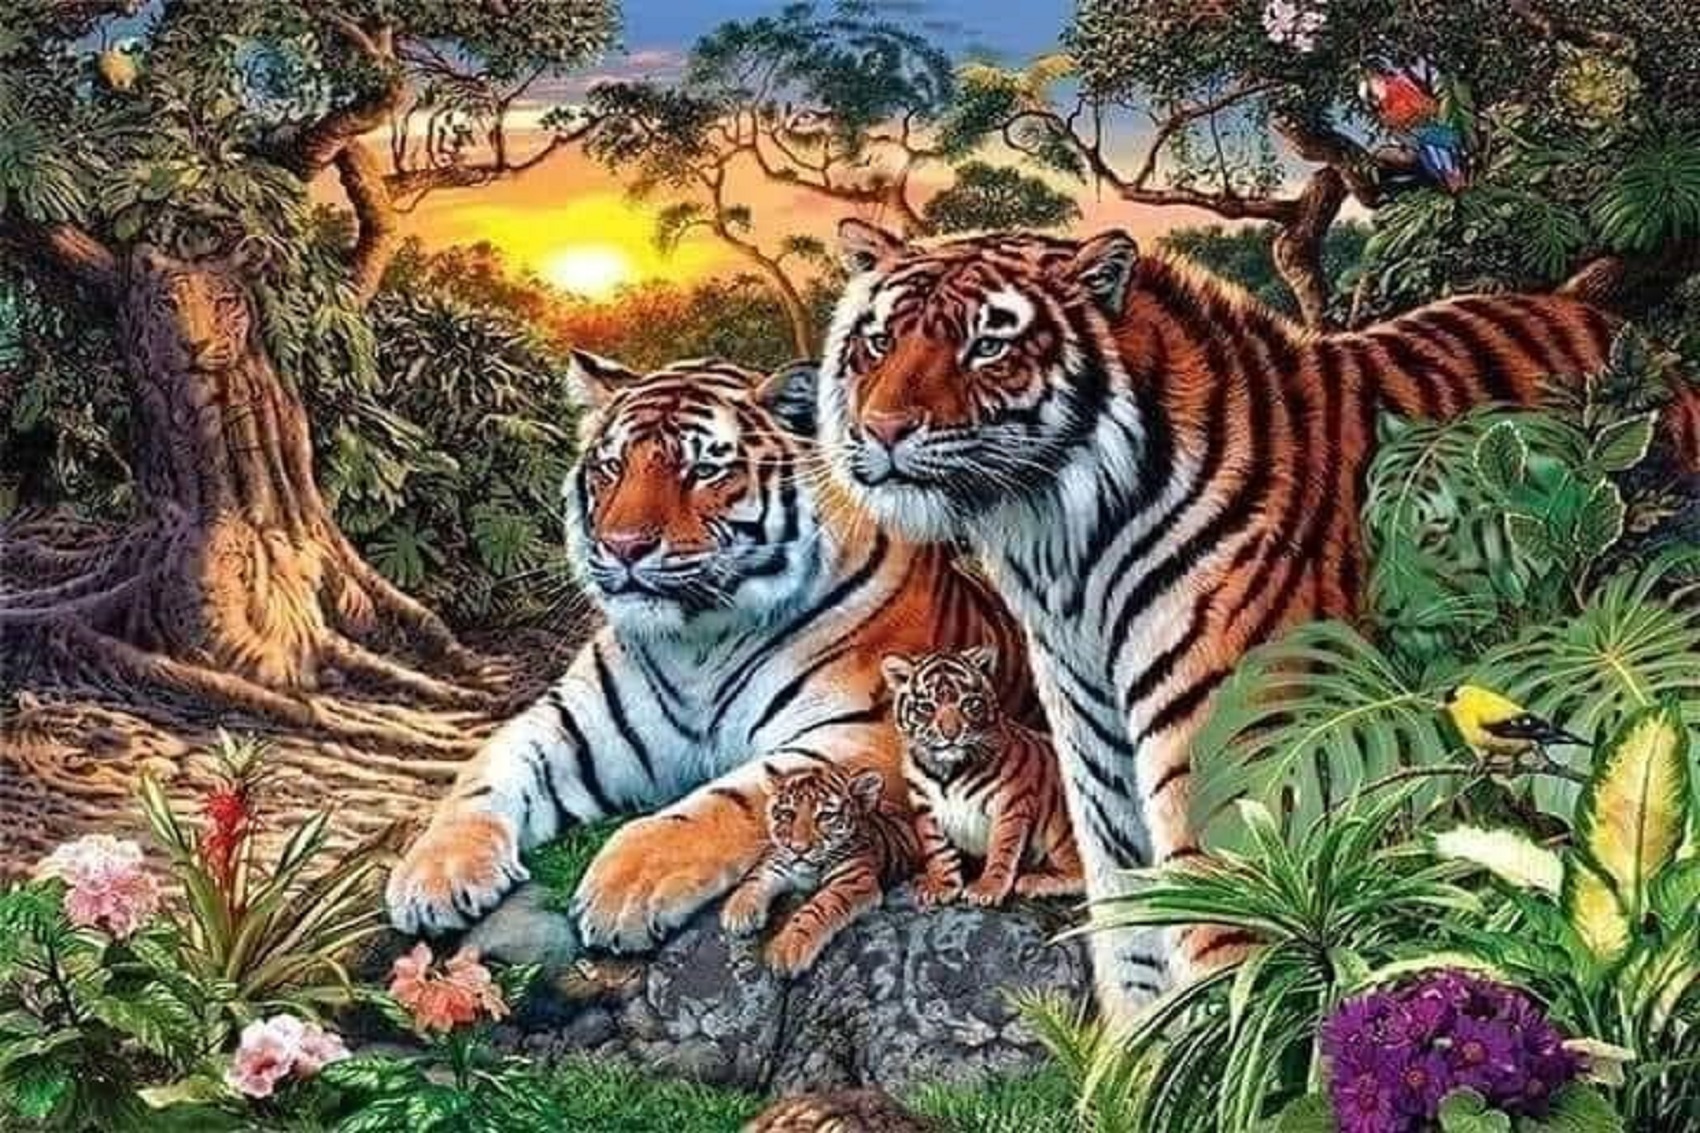 find the hidden tiger in the picture answer